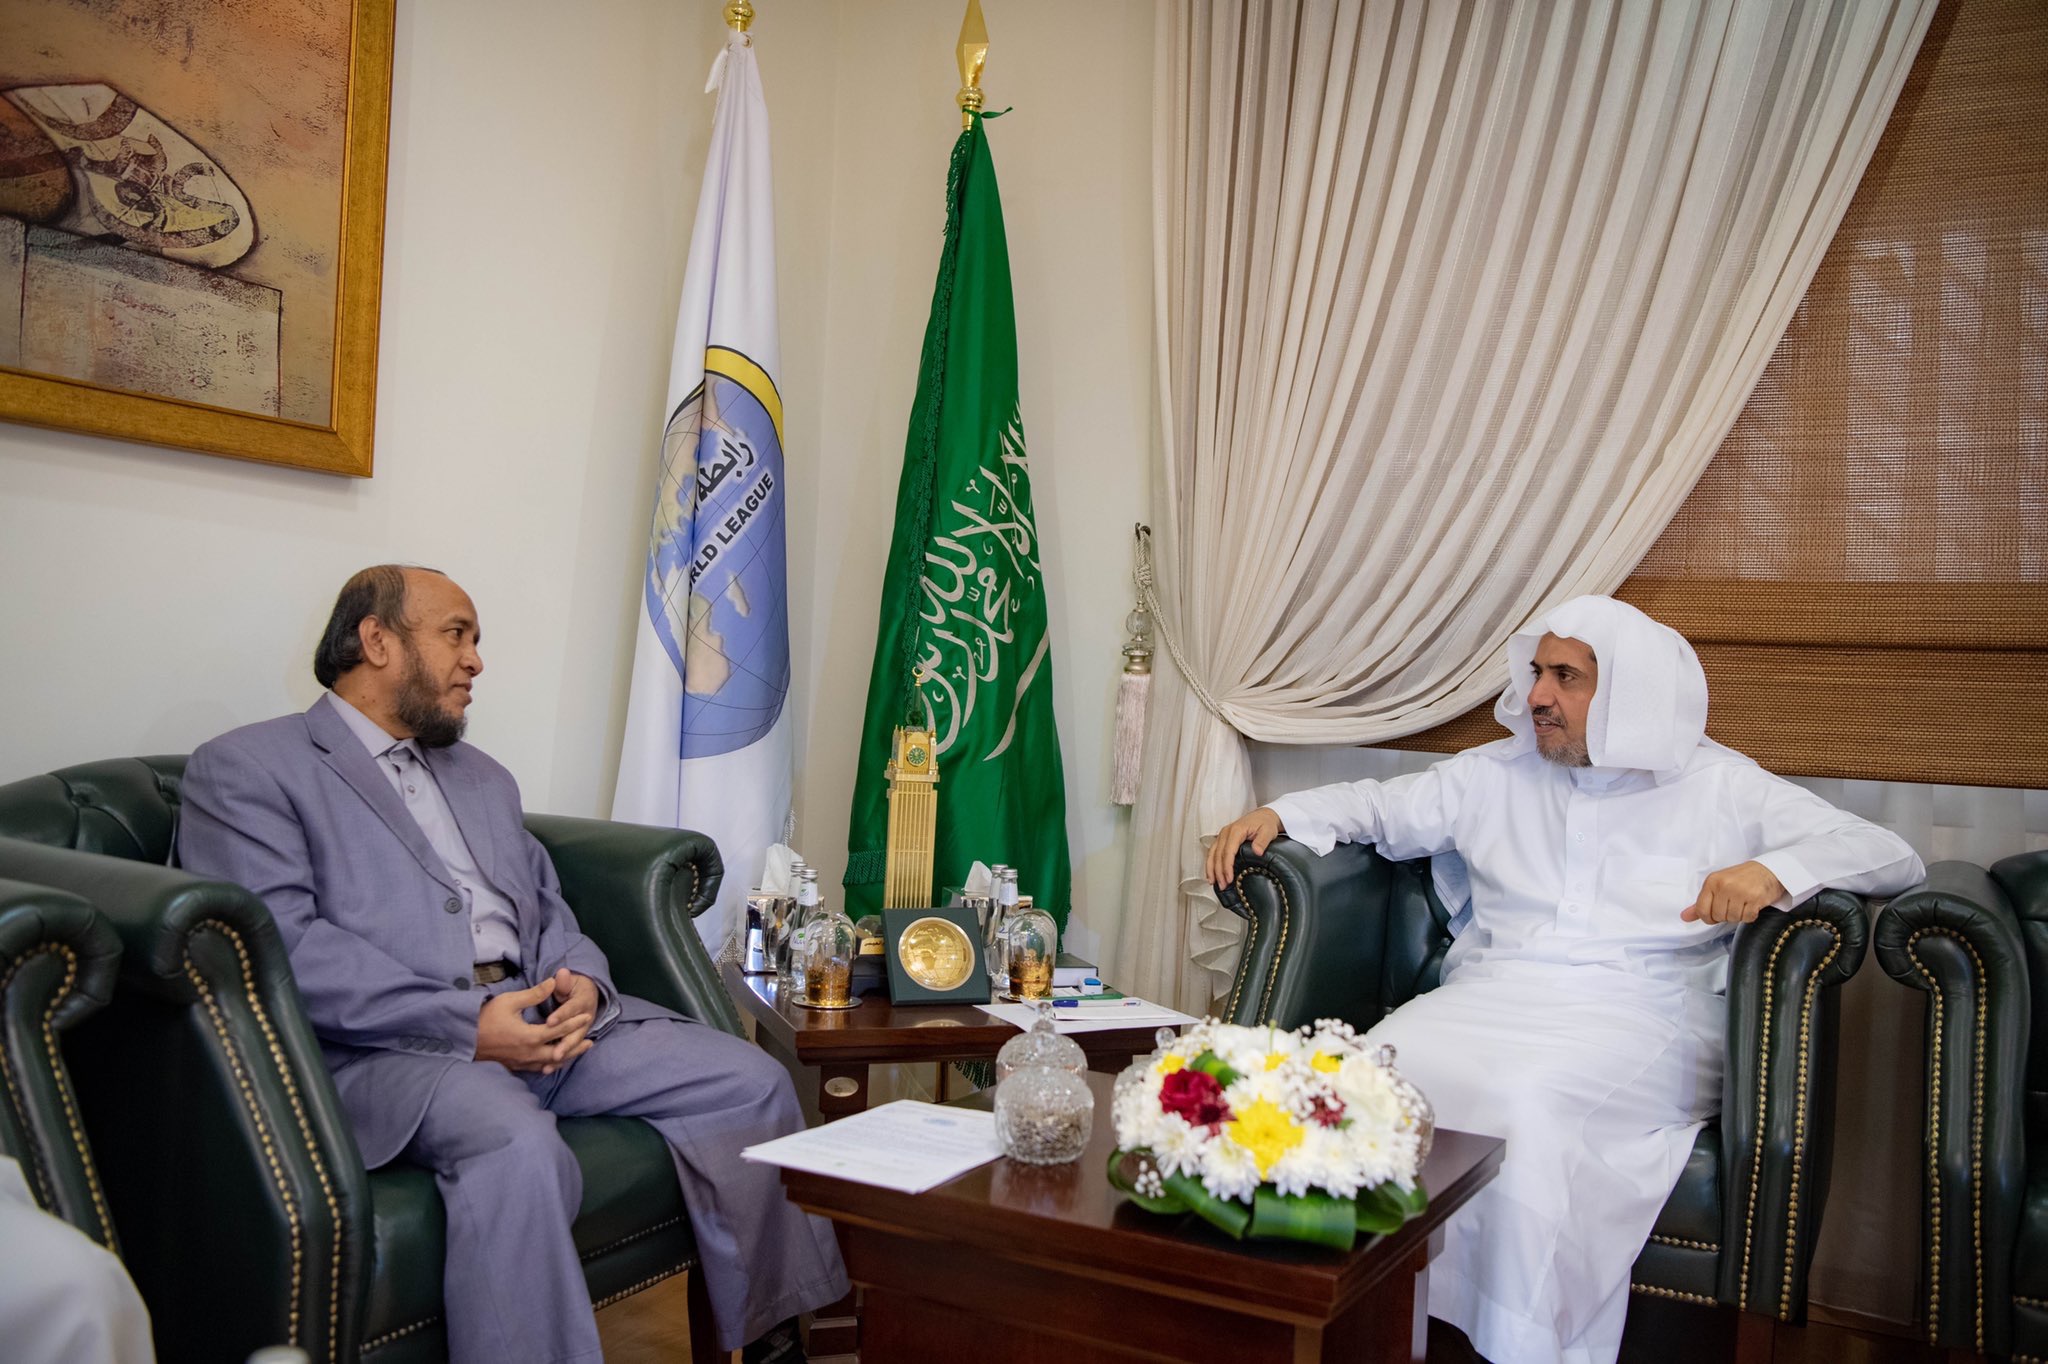 The SG of the MWL Dr. Alissa receives the President of Rohingya Solidarity Organization Mr. Salimullah Abdurrahman